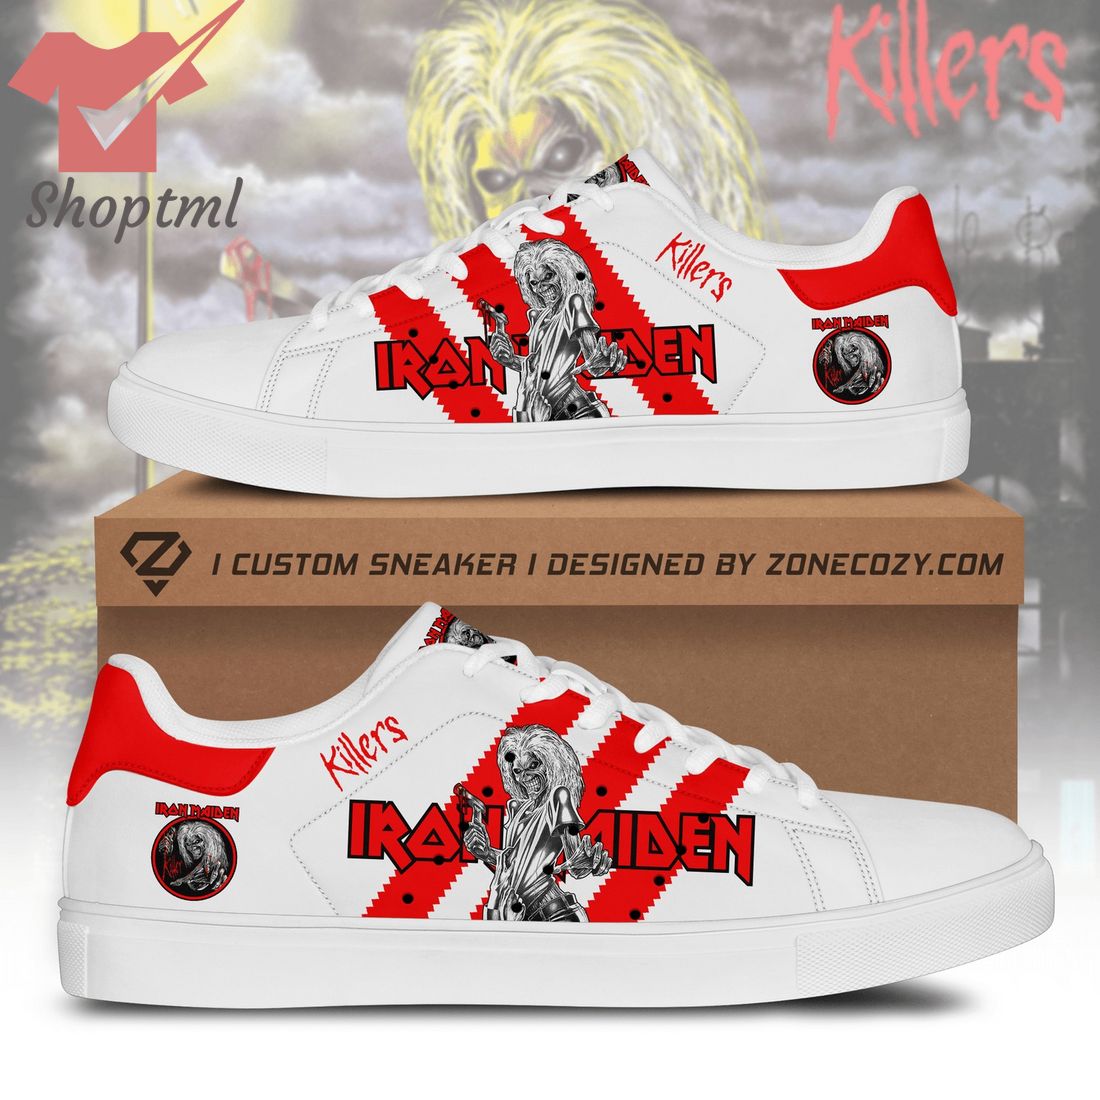 Iron Maiden killers ver 1 stan smith adidas shoes